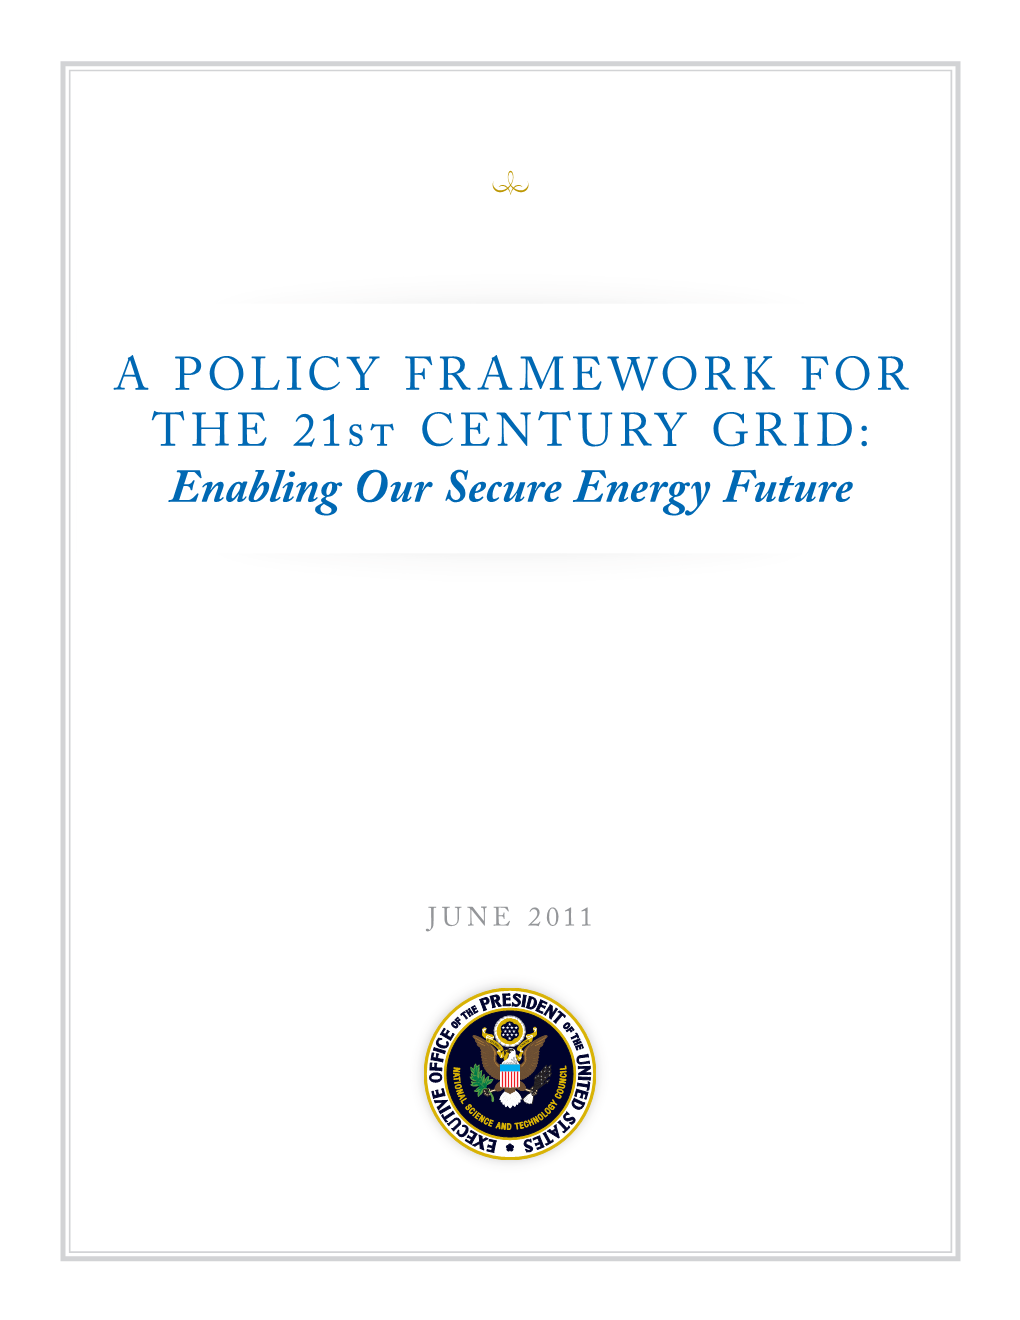 A POLICY FRAMEWORK for the 21St CENTURY GRID: Enabling Our Secure Energy Future